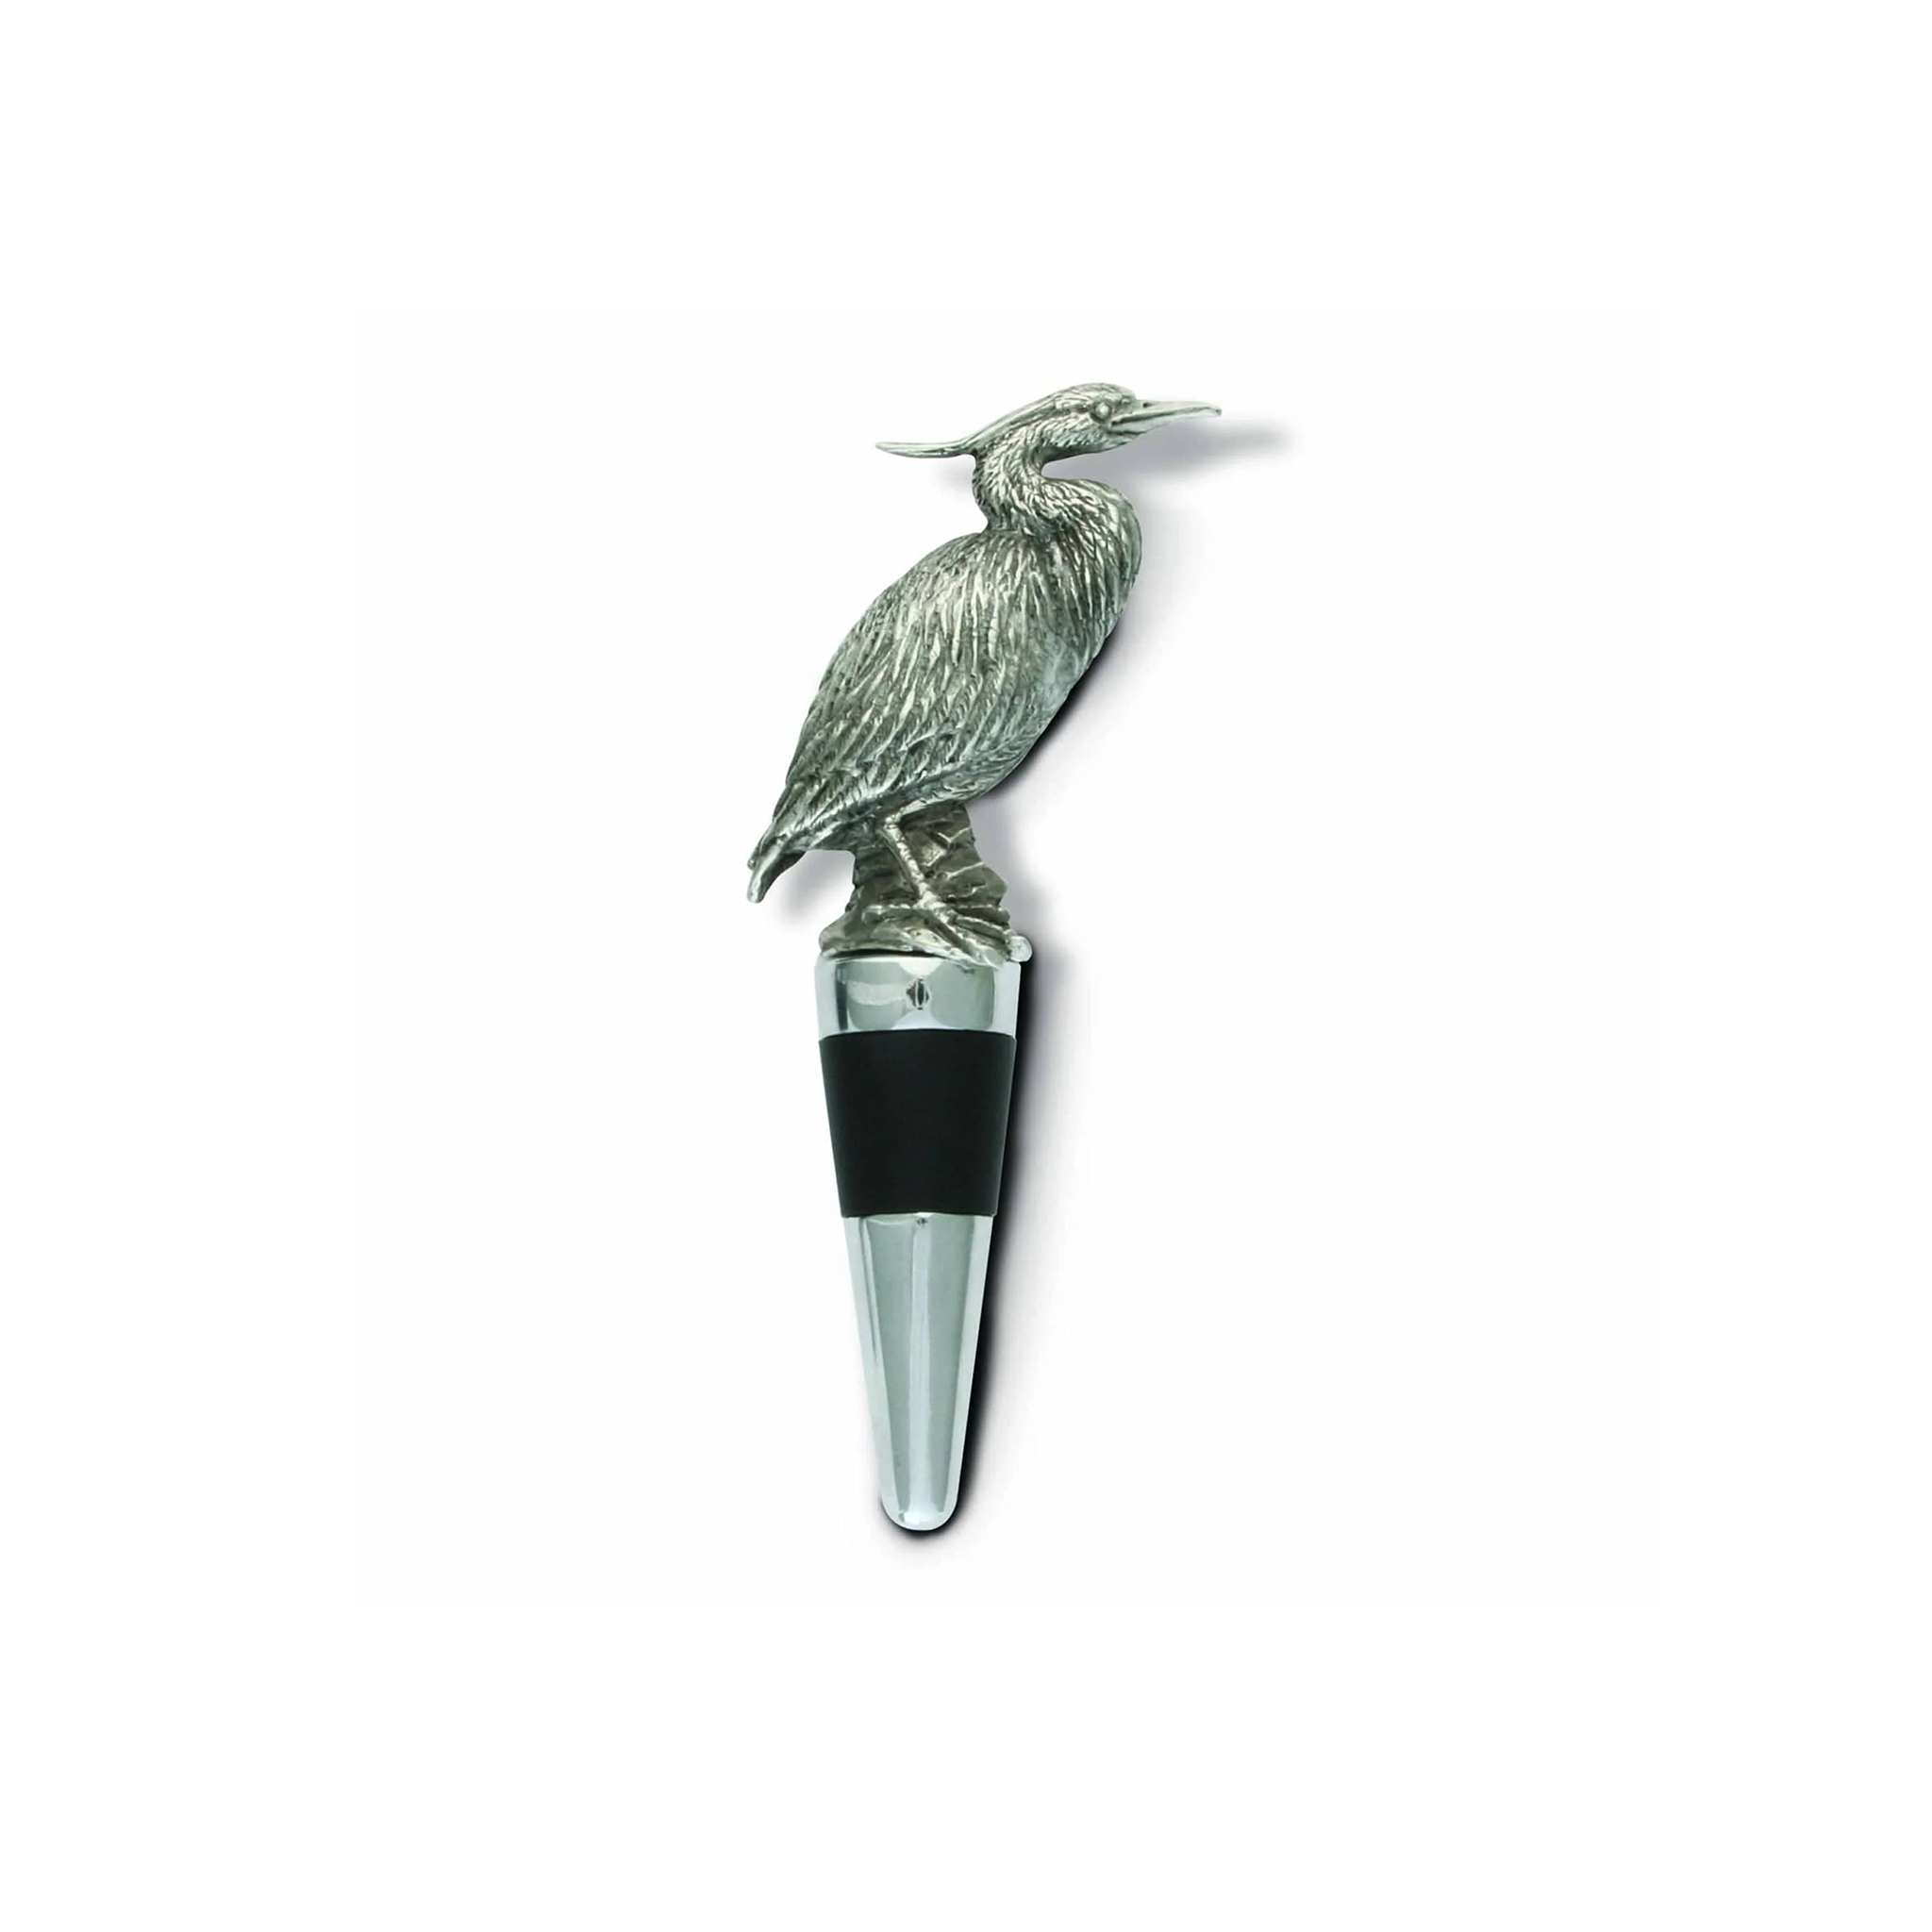 a wine bottle stopper topped with a detailed pewter figurine of a blue heron. The heron's feathers are finely textured, and its neck is gracefully elongated. The stopper itself has a conical shape with a black rubber seal, highlighting an elegant design.